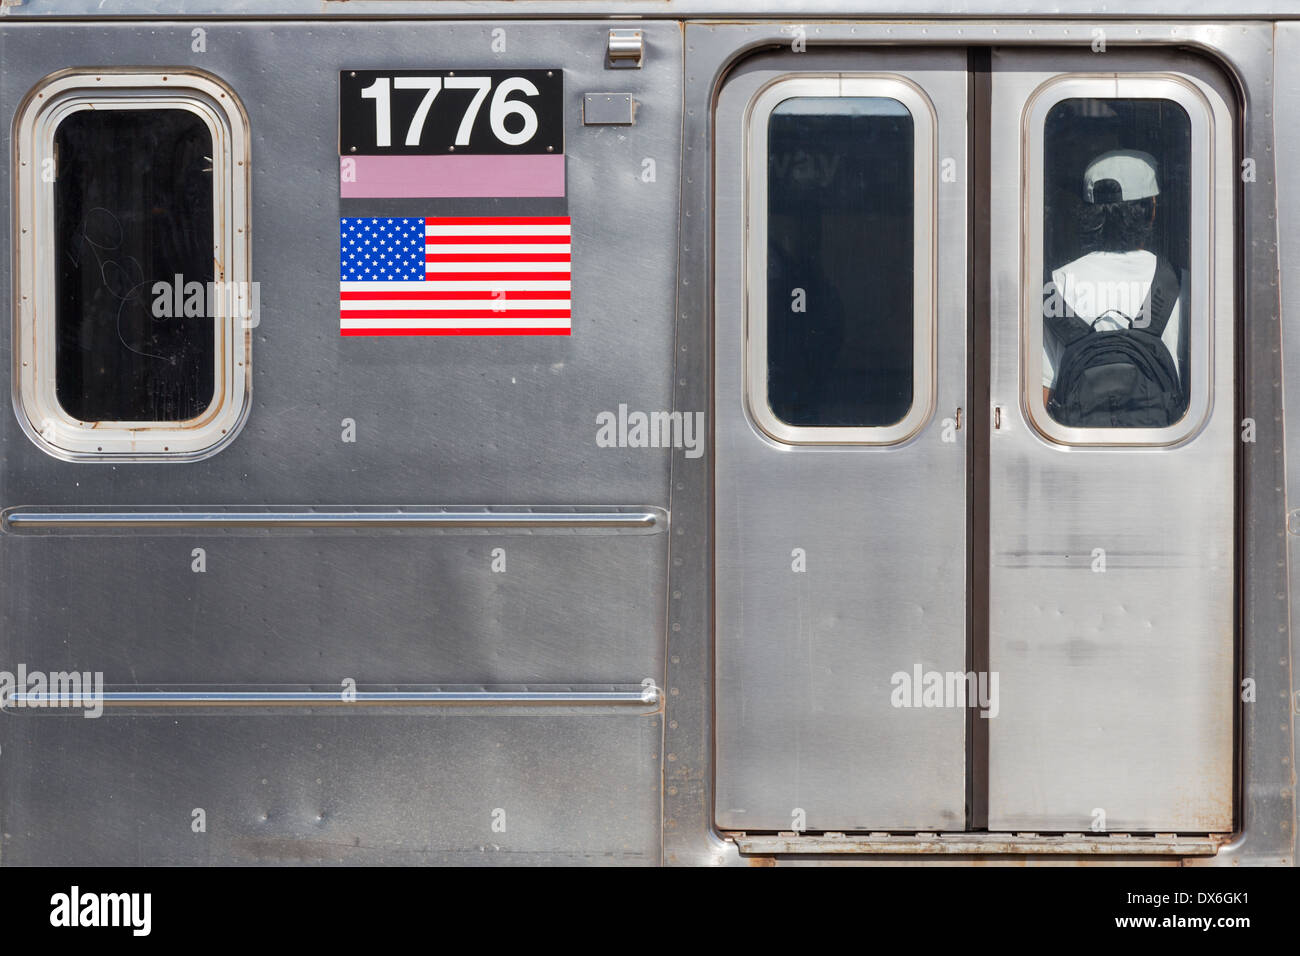 Street photo of detail on an NYC subway car that happens to have a very patriotic registration number: 1776. Stock Photo